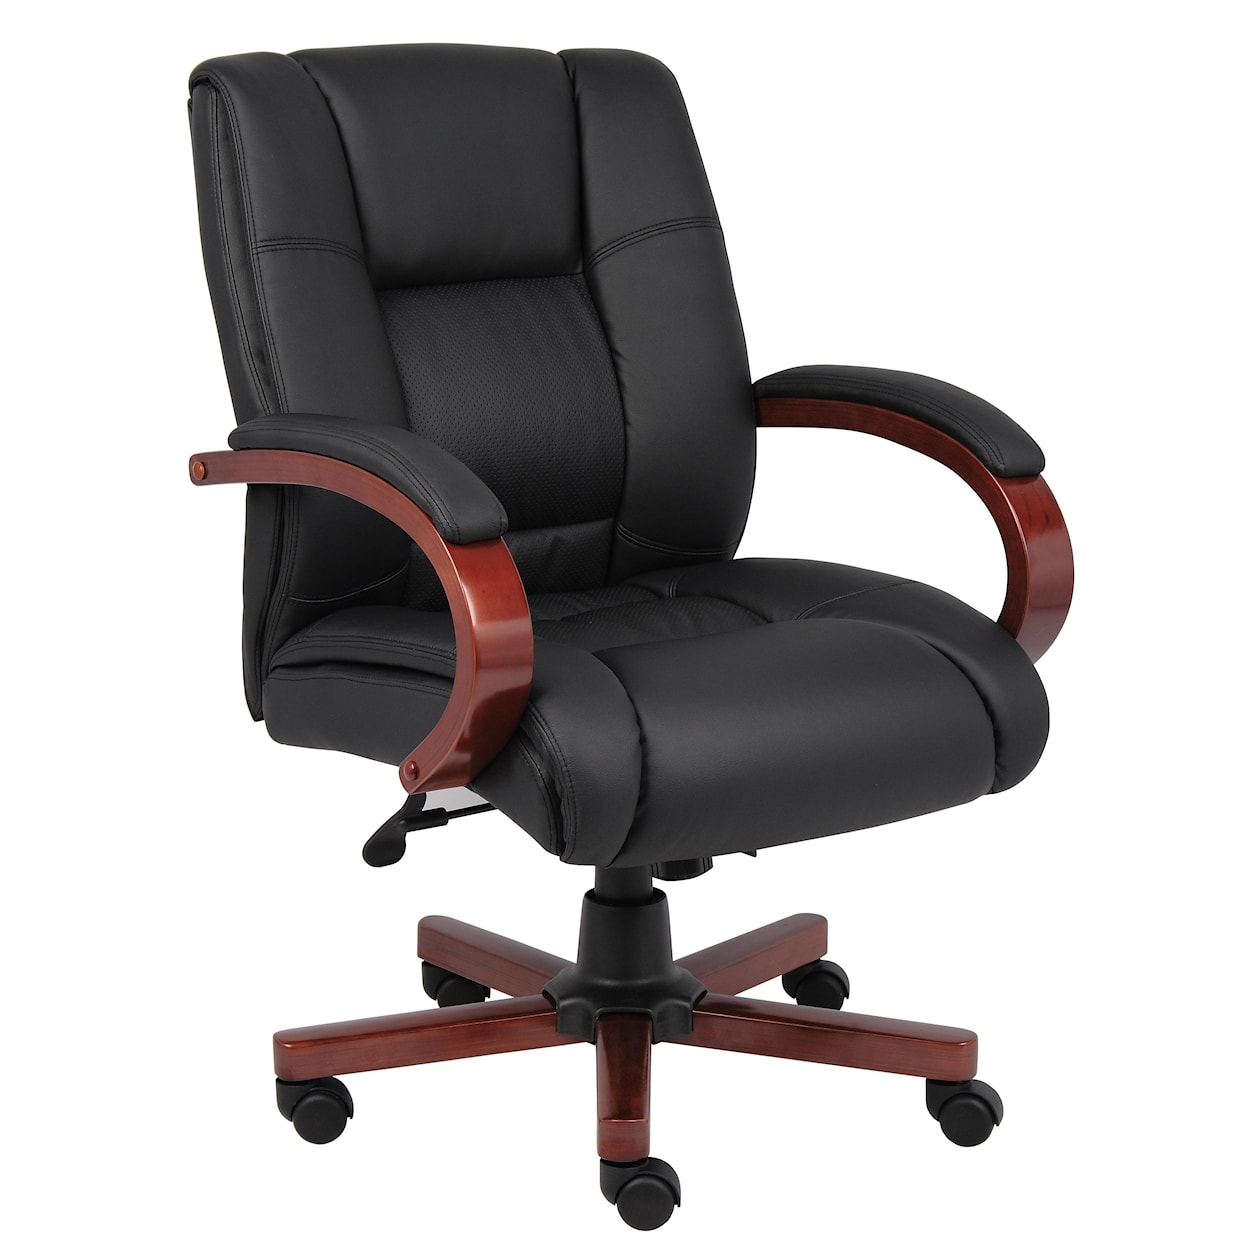 Presidential Seating Executive Chairs Upholstered Executive Chair